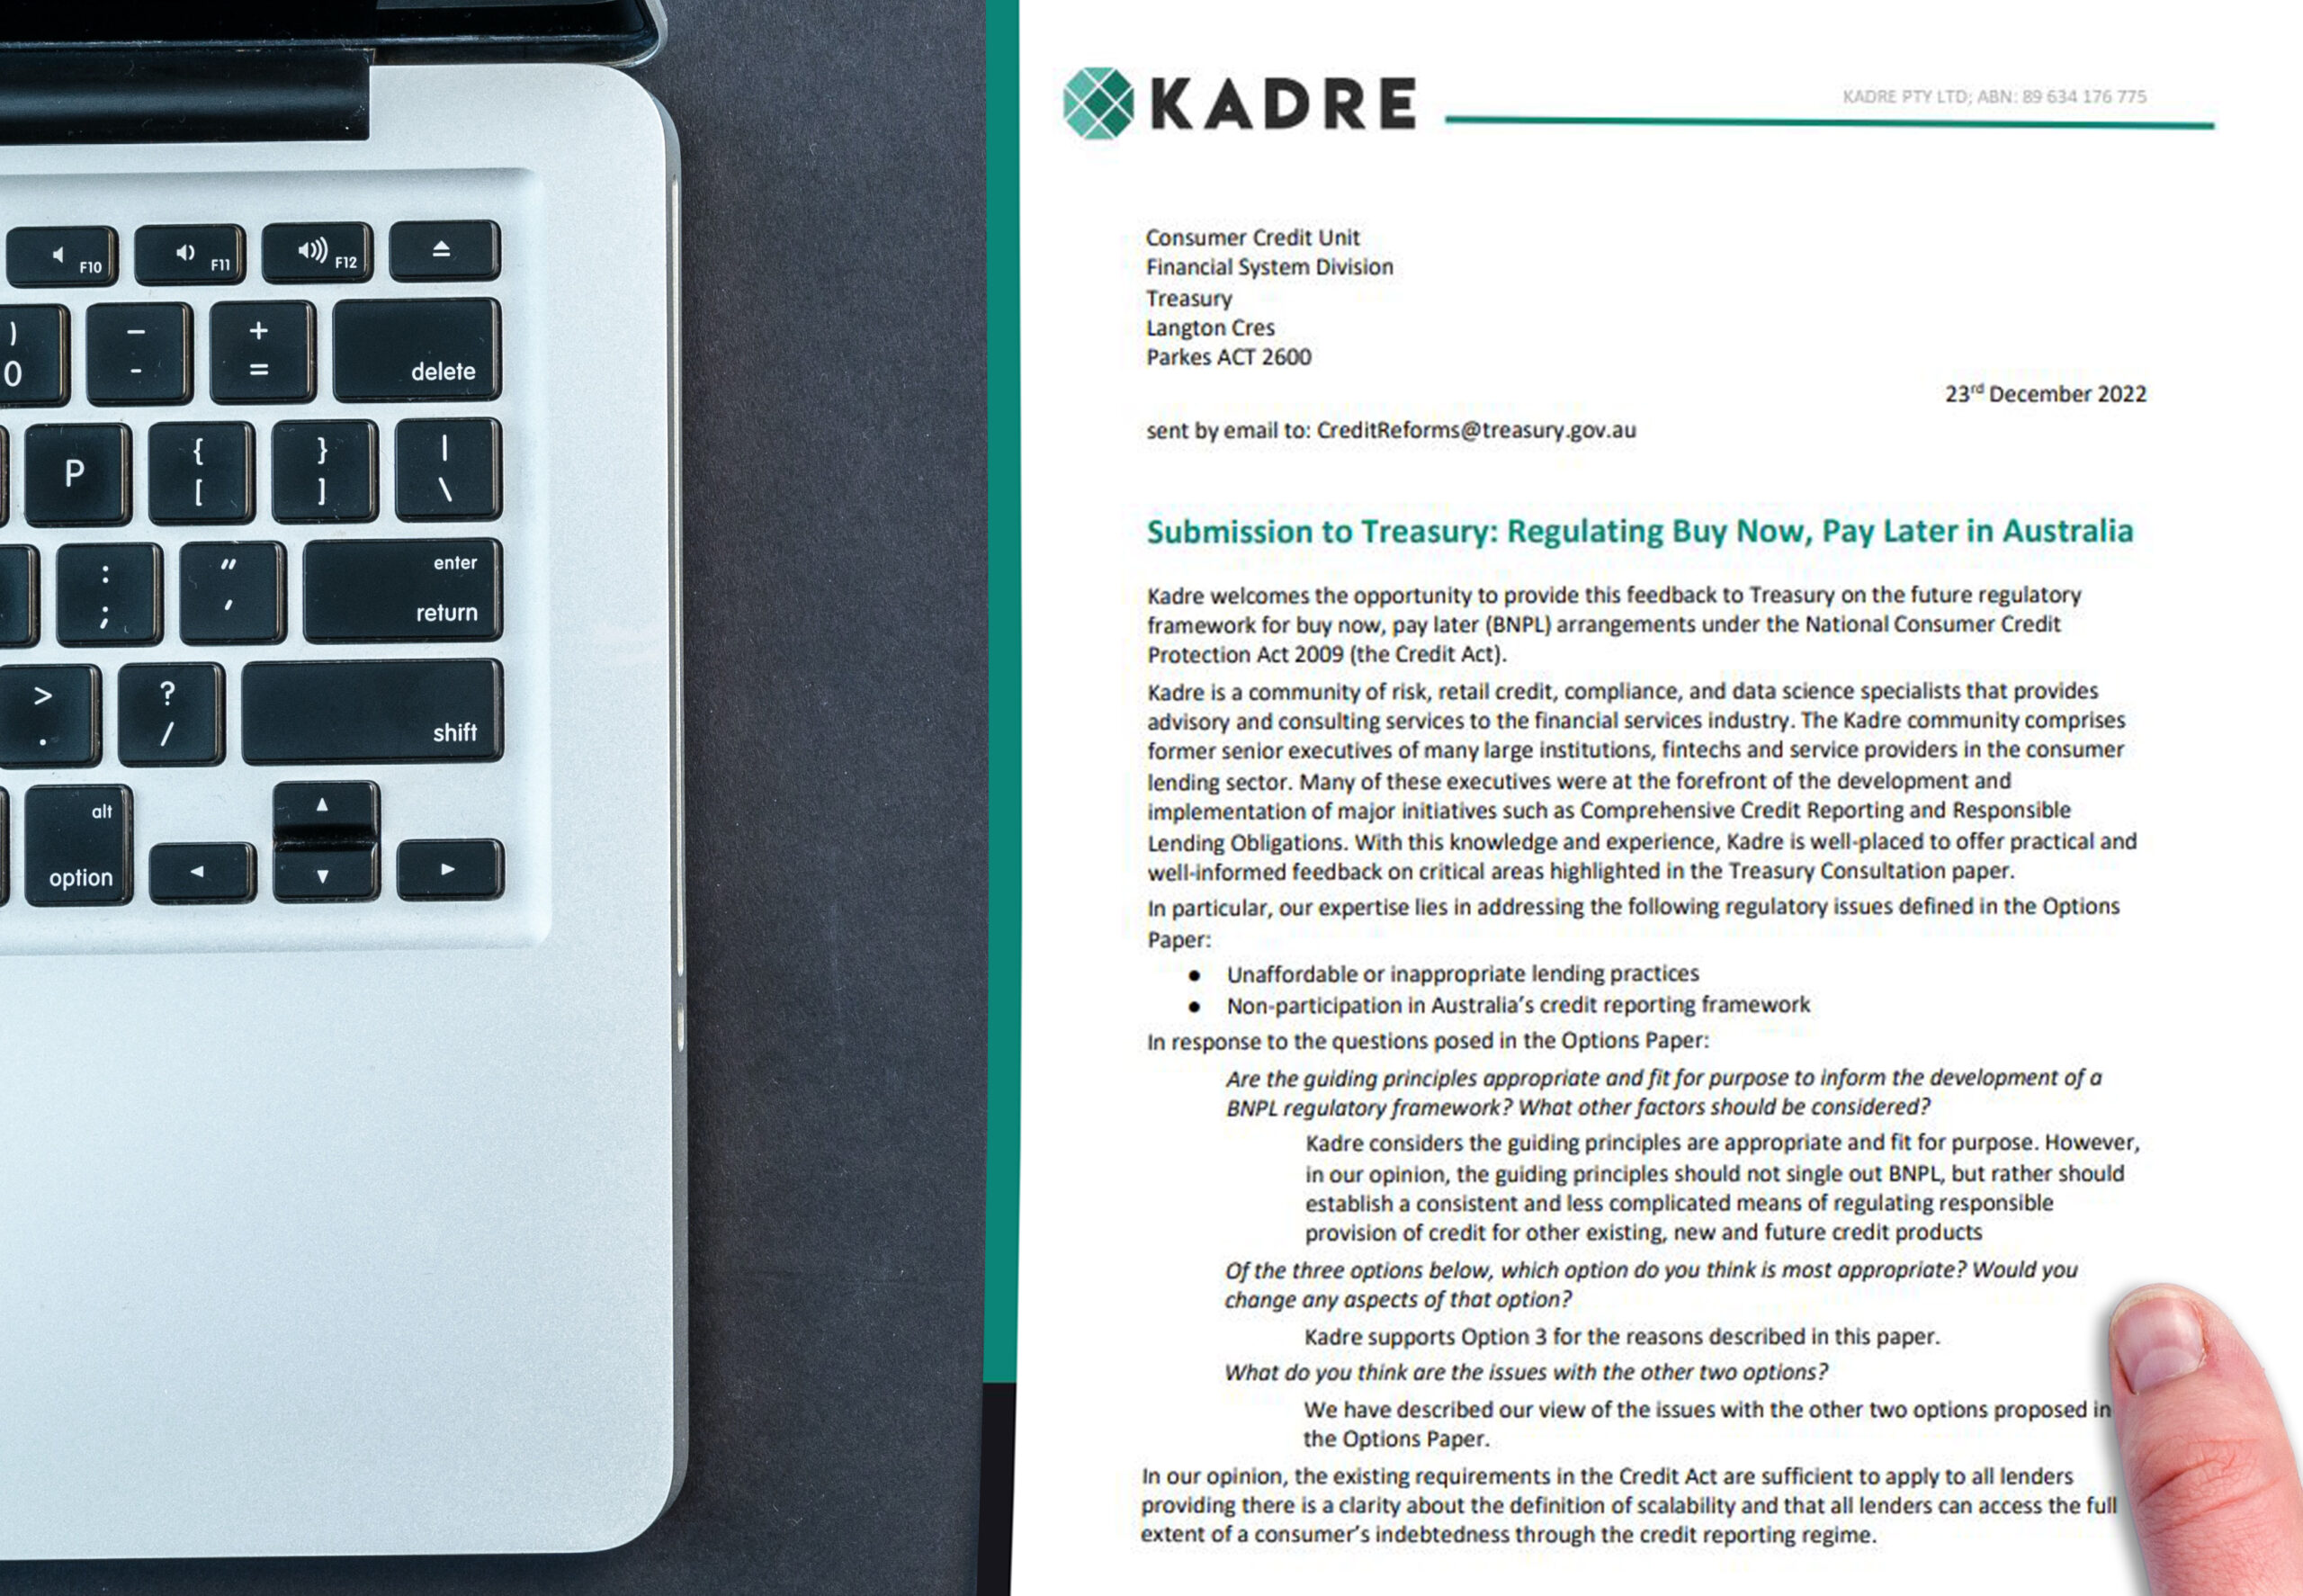 Kadre’s submission to Treasury on BNPL